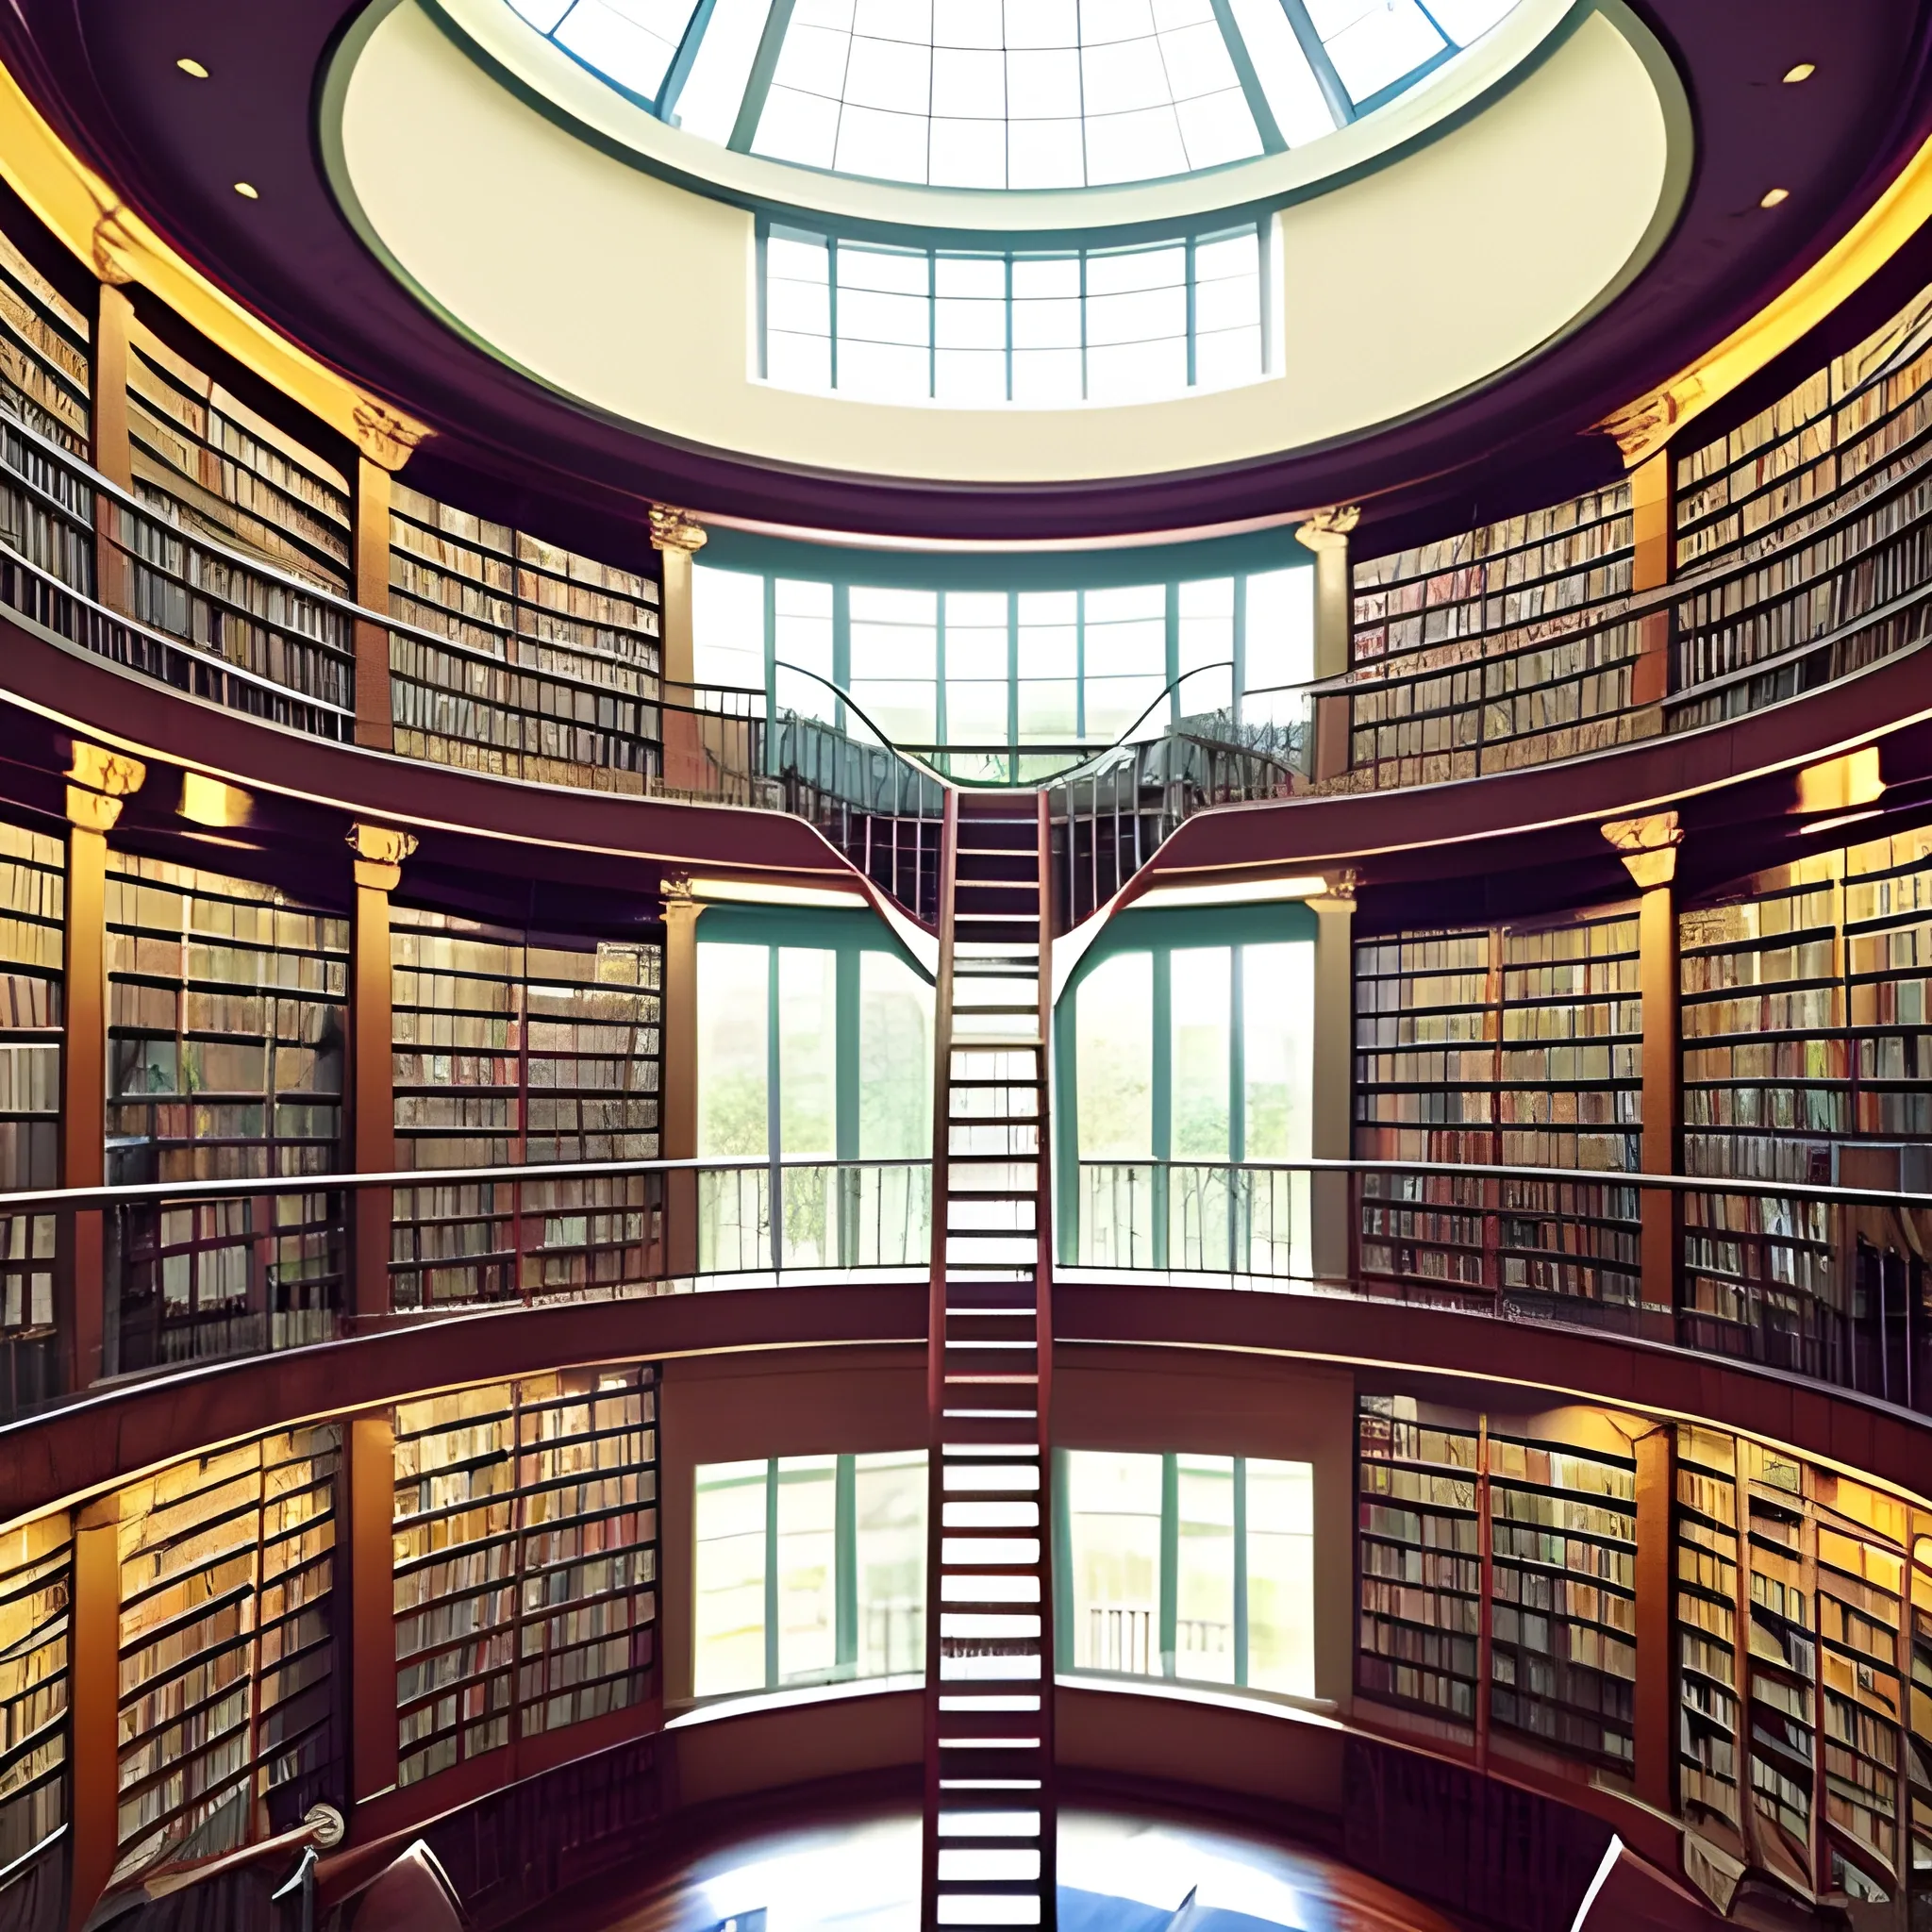 Library, Big Library, Circular Library, 2 Floor Library, Circular Ladders, Comfy, Home Library, For-1-person Library, Personal Library, Good lighting, Look from Inside, Full HD, Windows, Great Windows